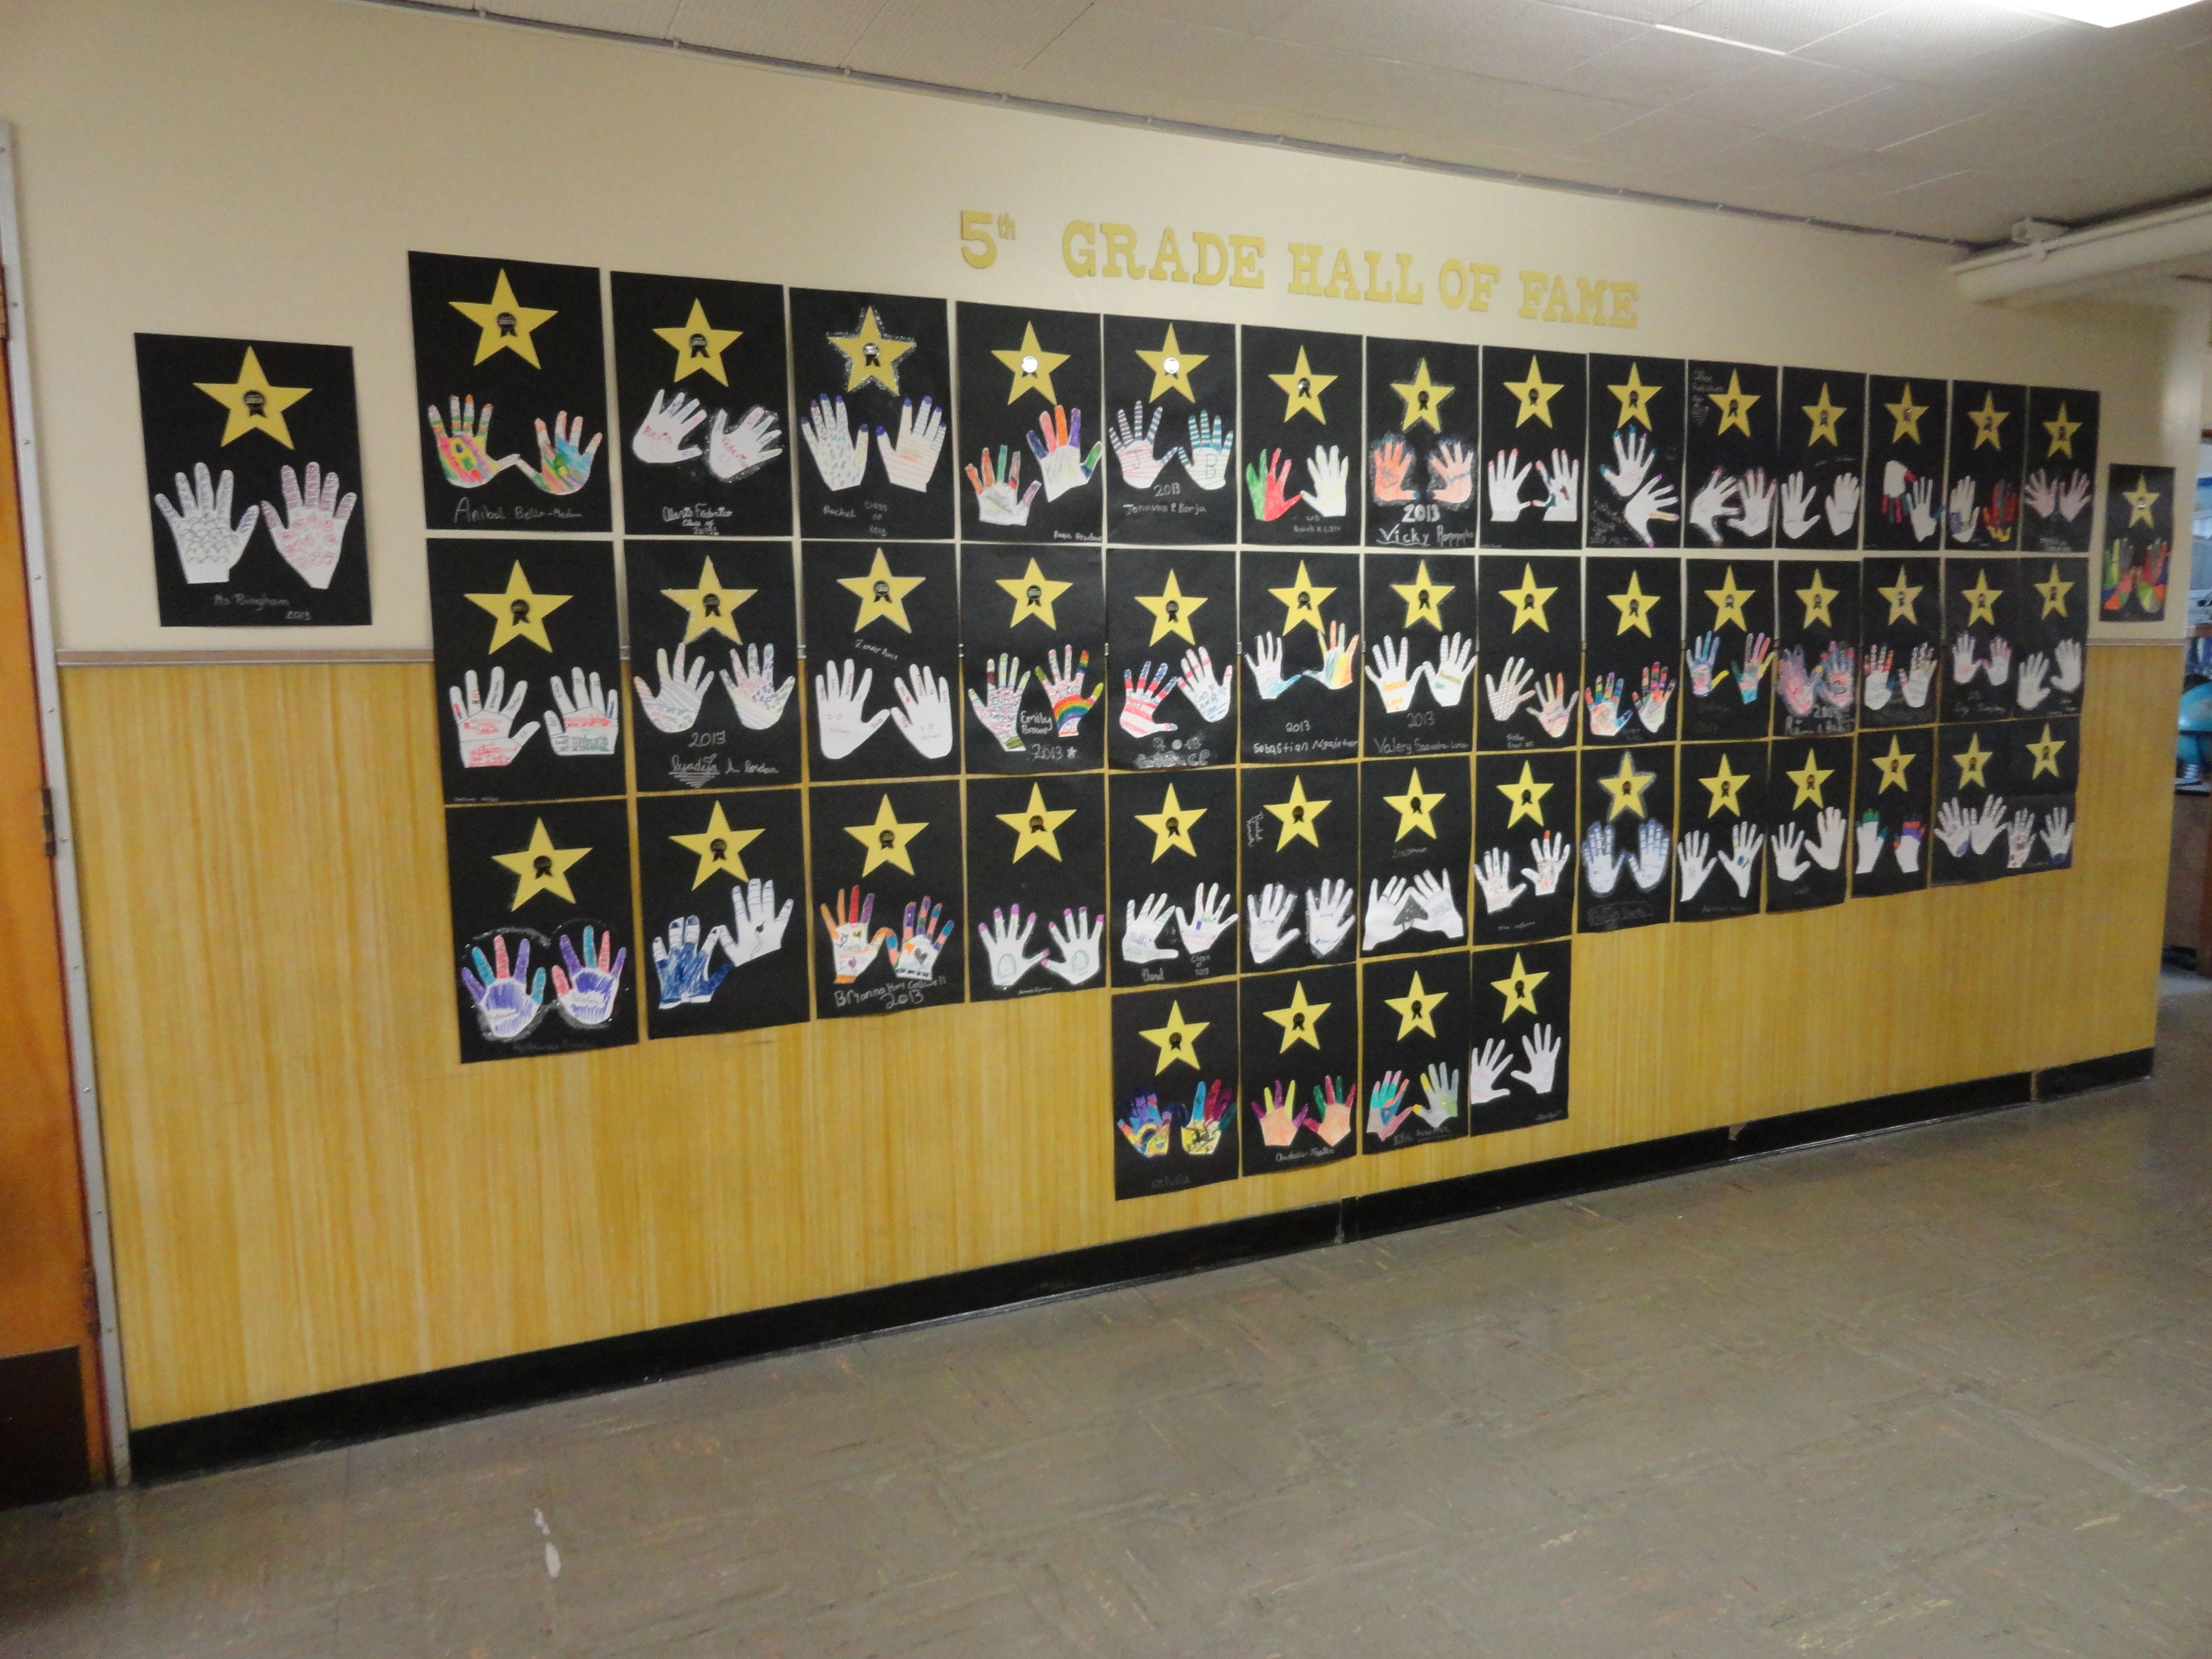 5th Grade Graduation Hall Of Fame This Was Very Fun For Staff